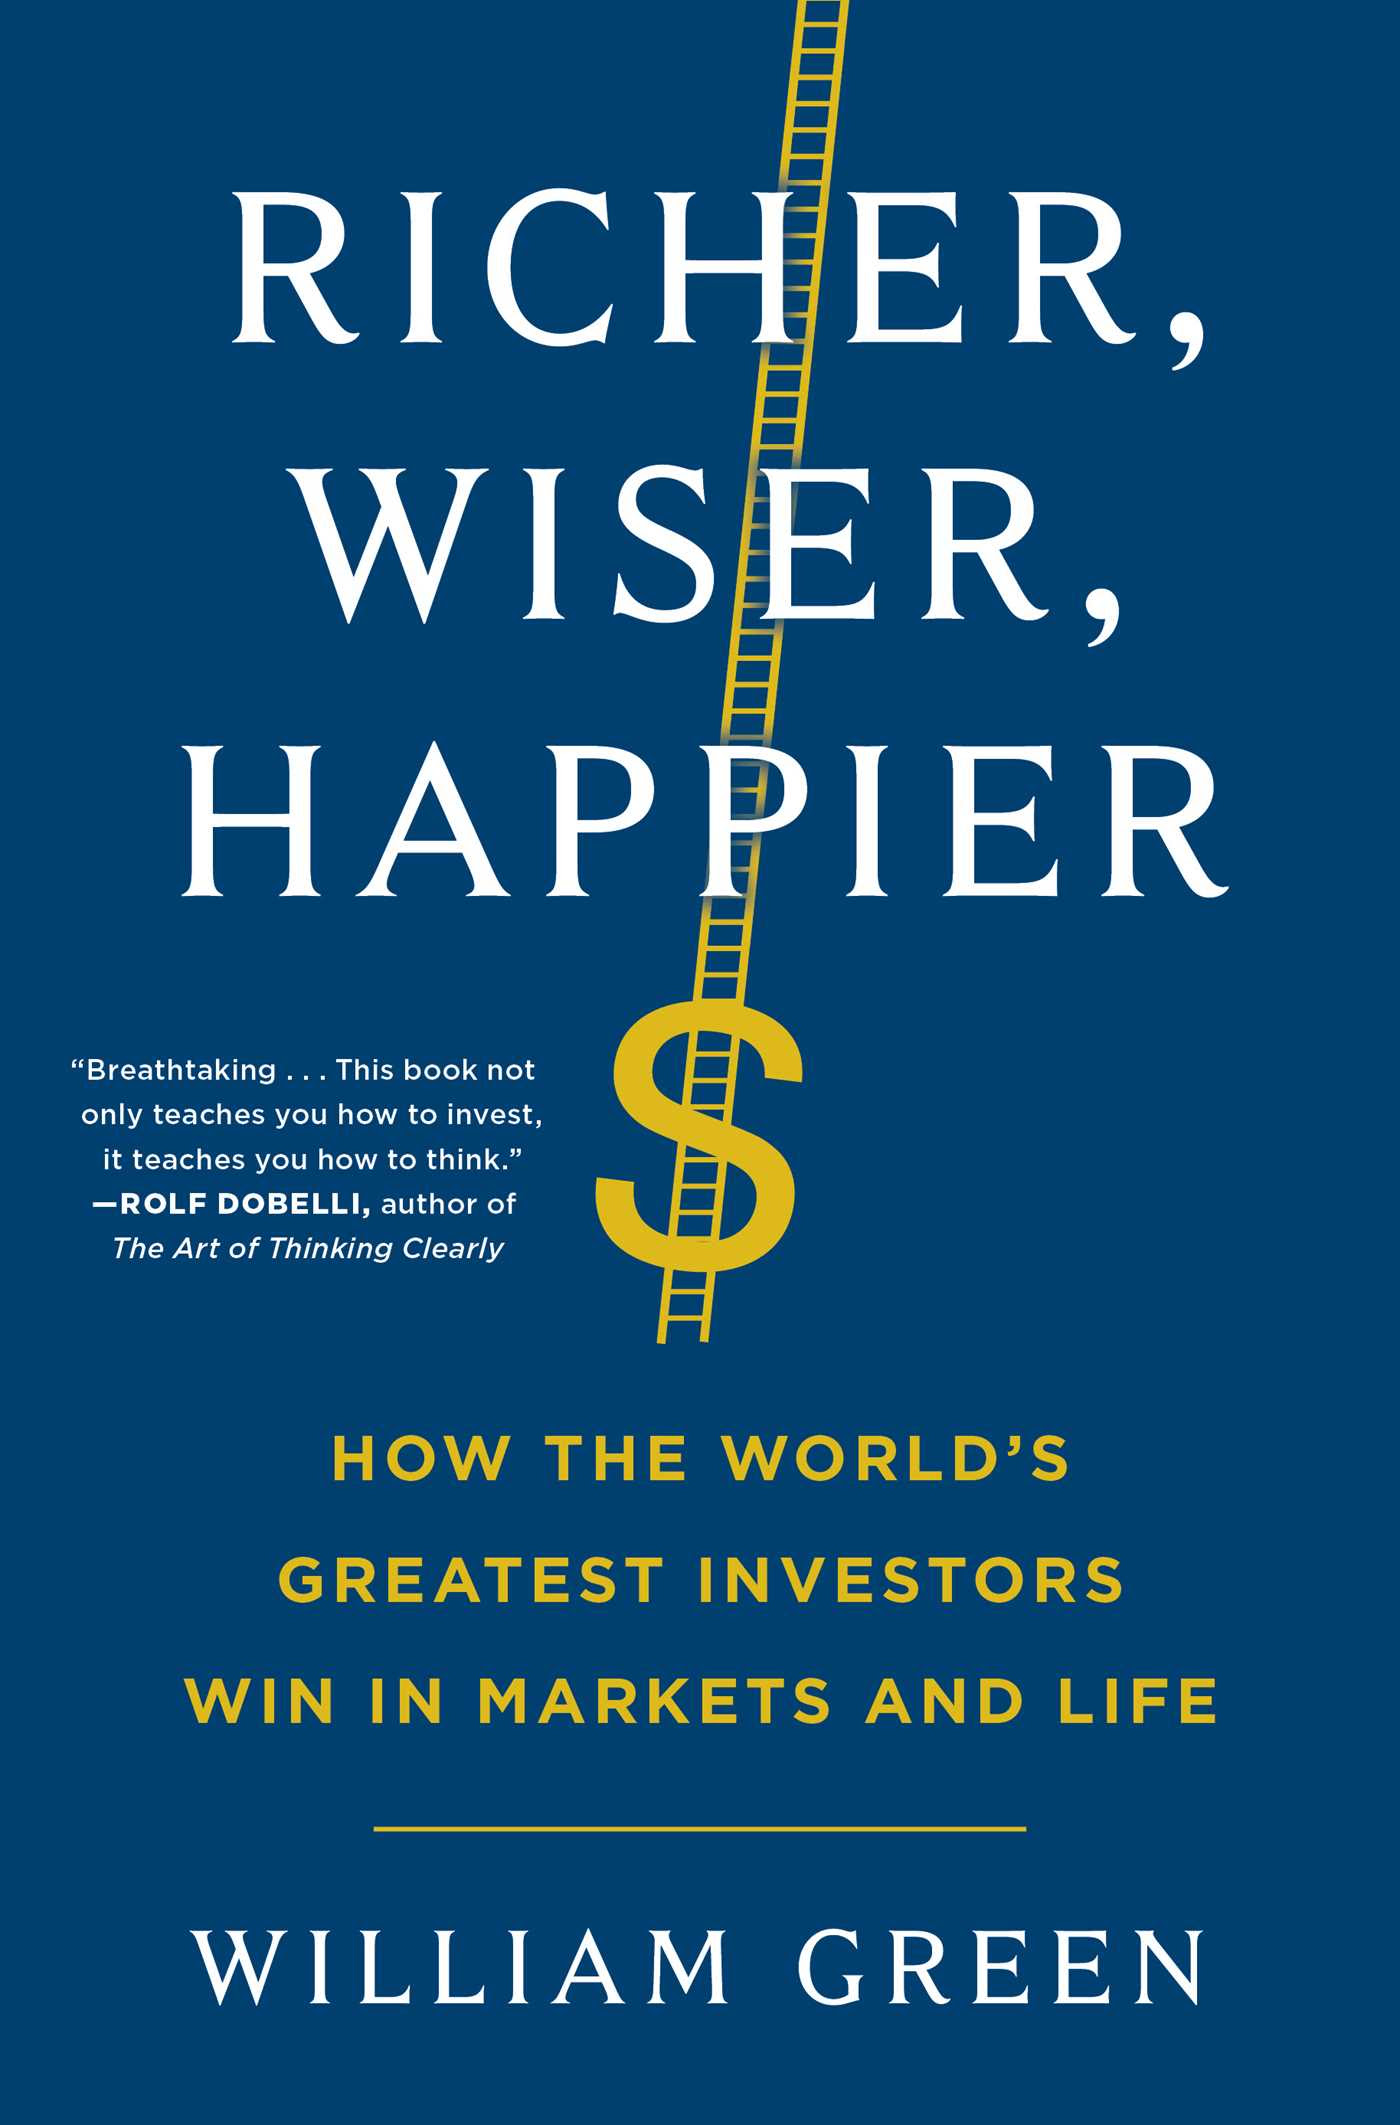 Richer, Wiser, Happier: How the World's Greatest Investors Win in Markets and Life PDF